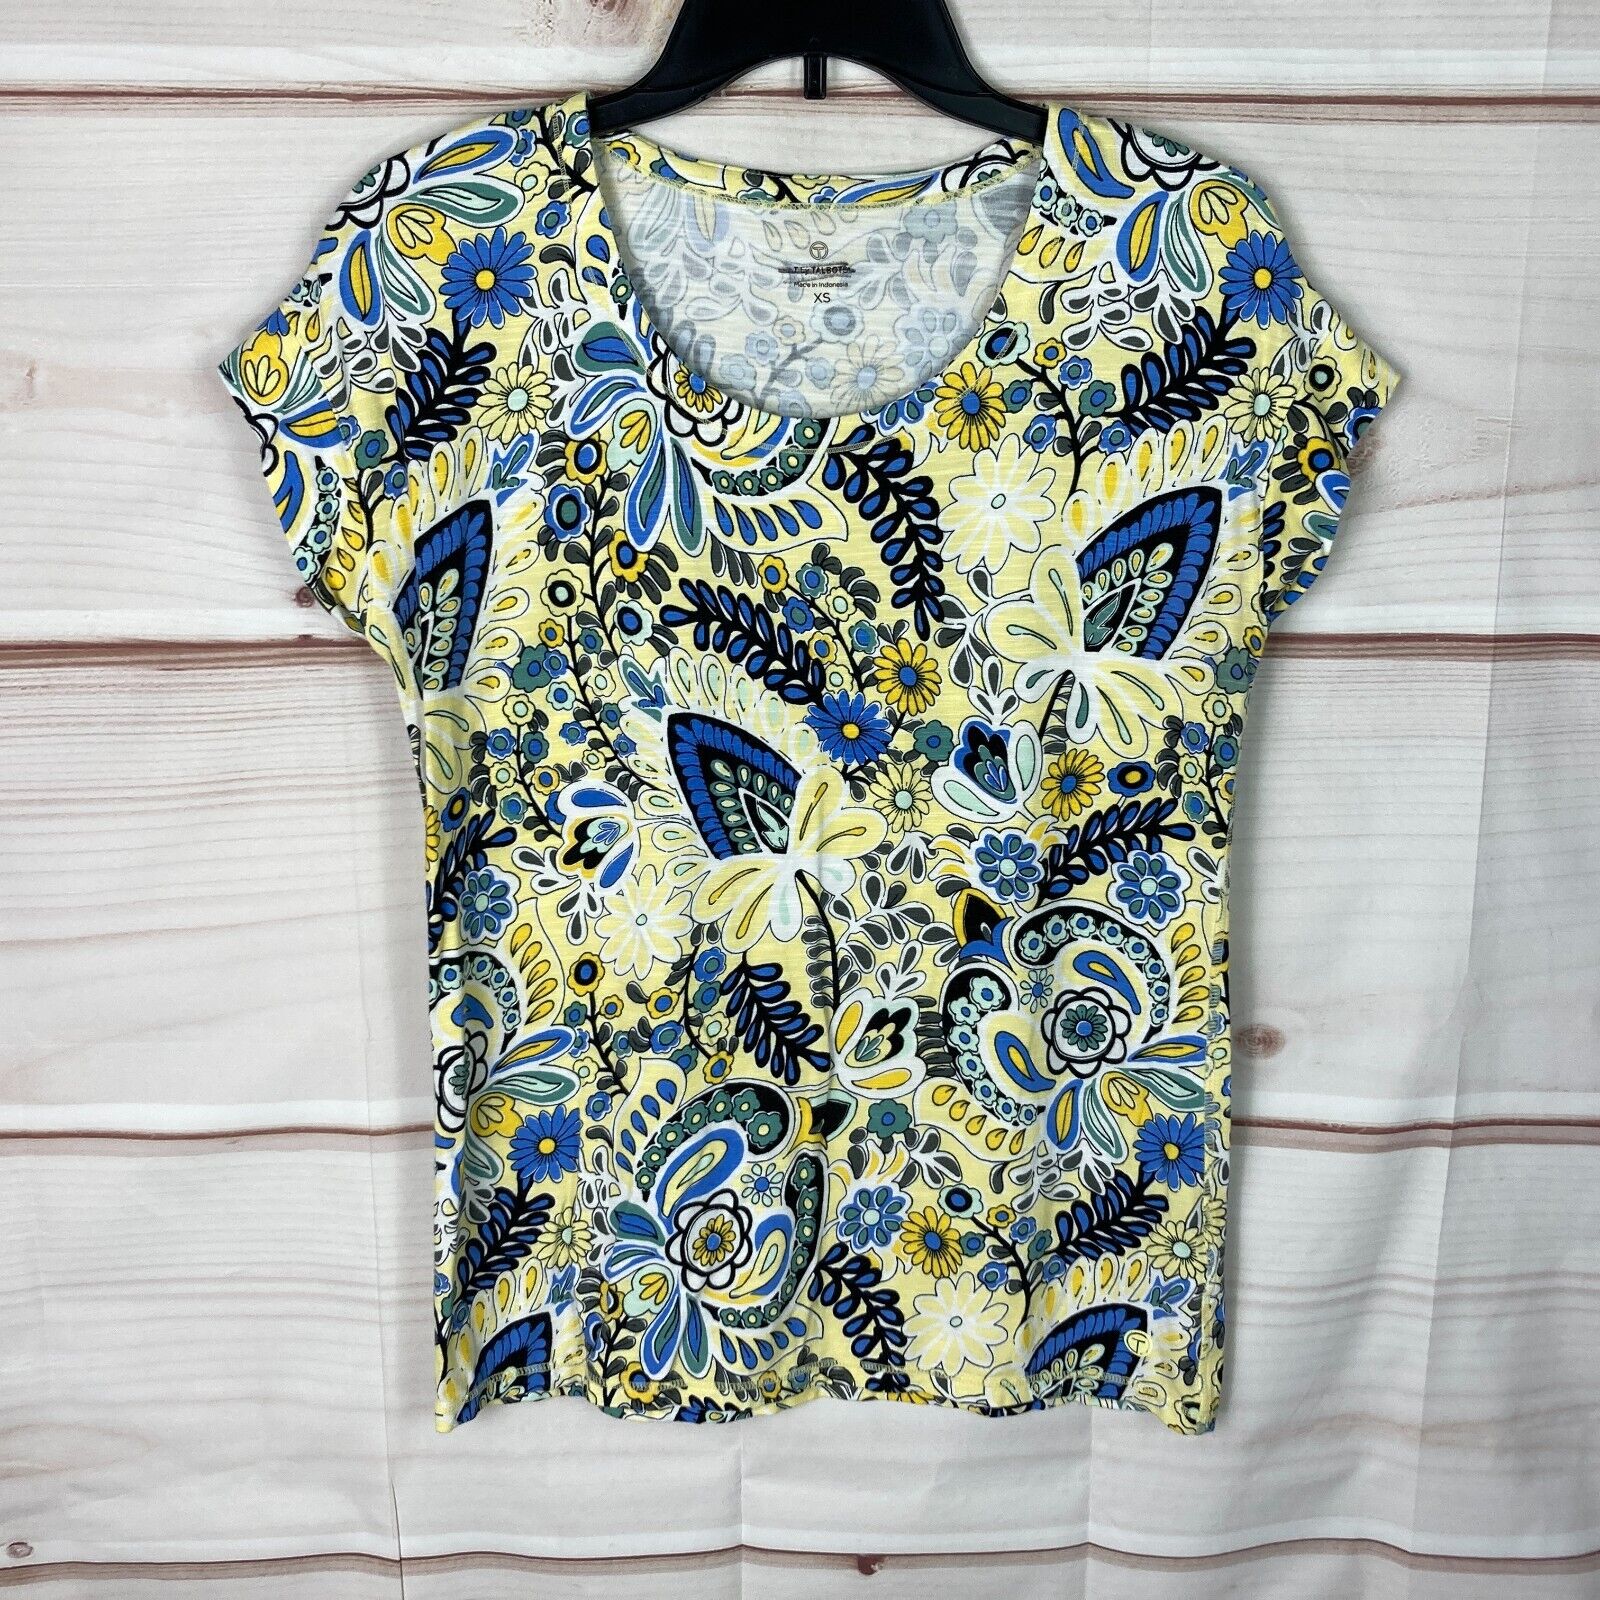 T By Talbots Top Womens XS Yellow Blue Floral T-Shirt Scoop Neck Short Sleeve